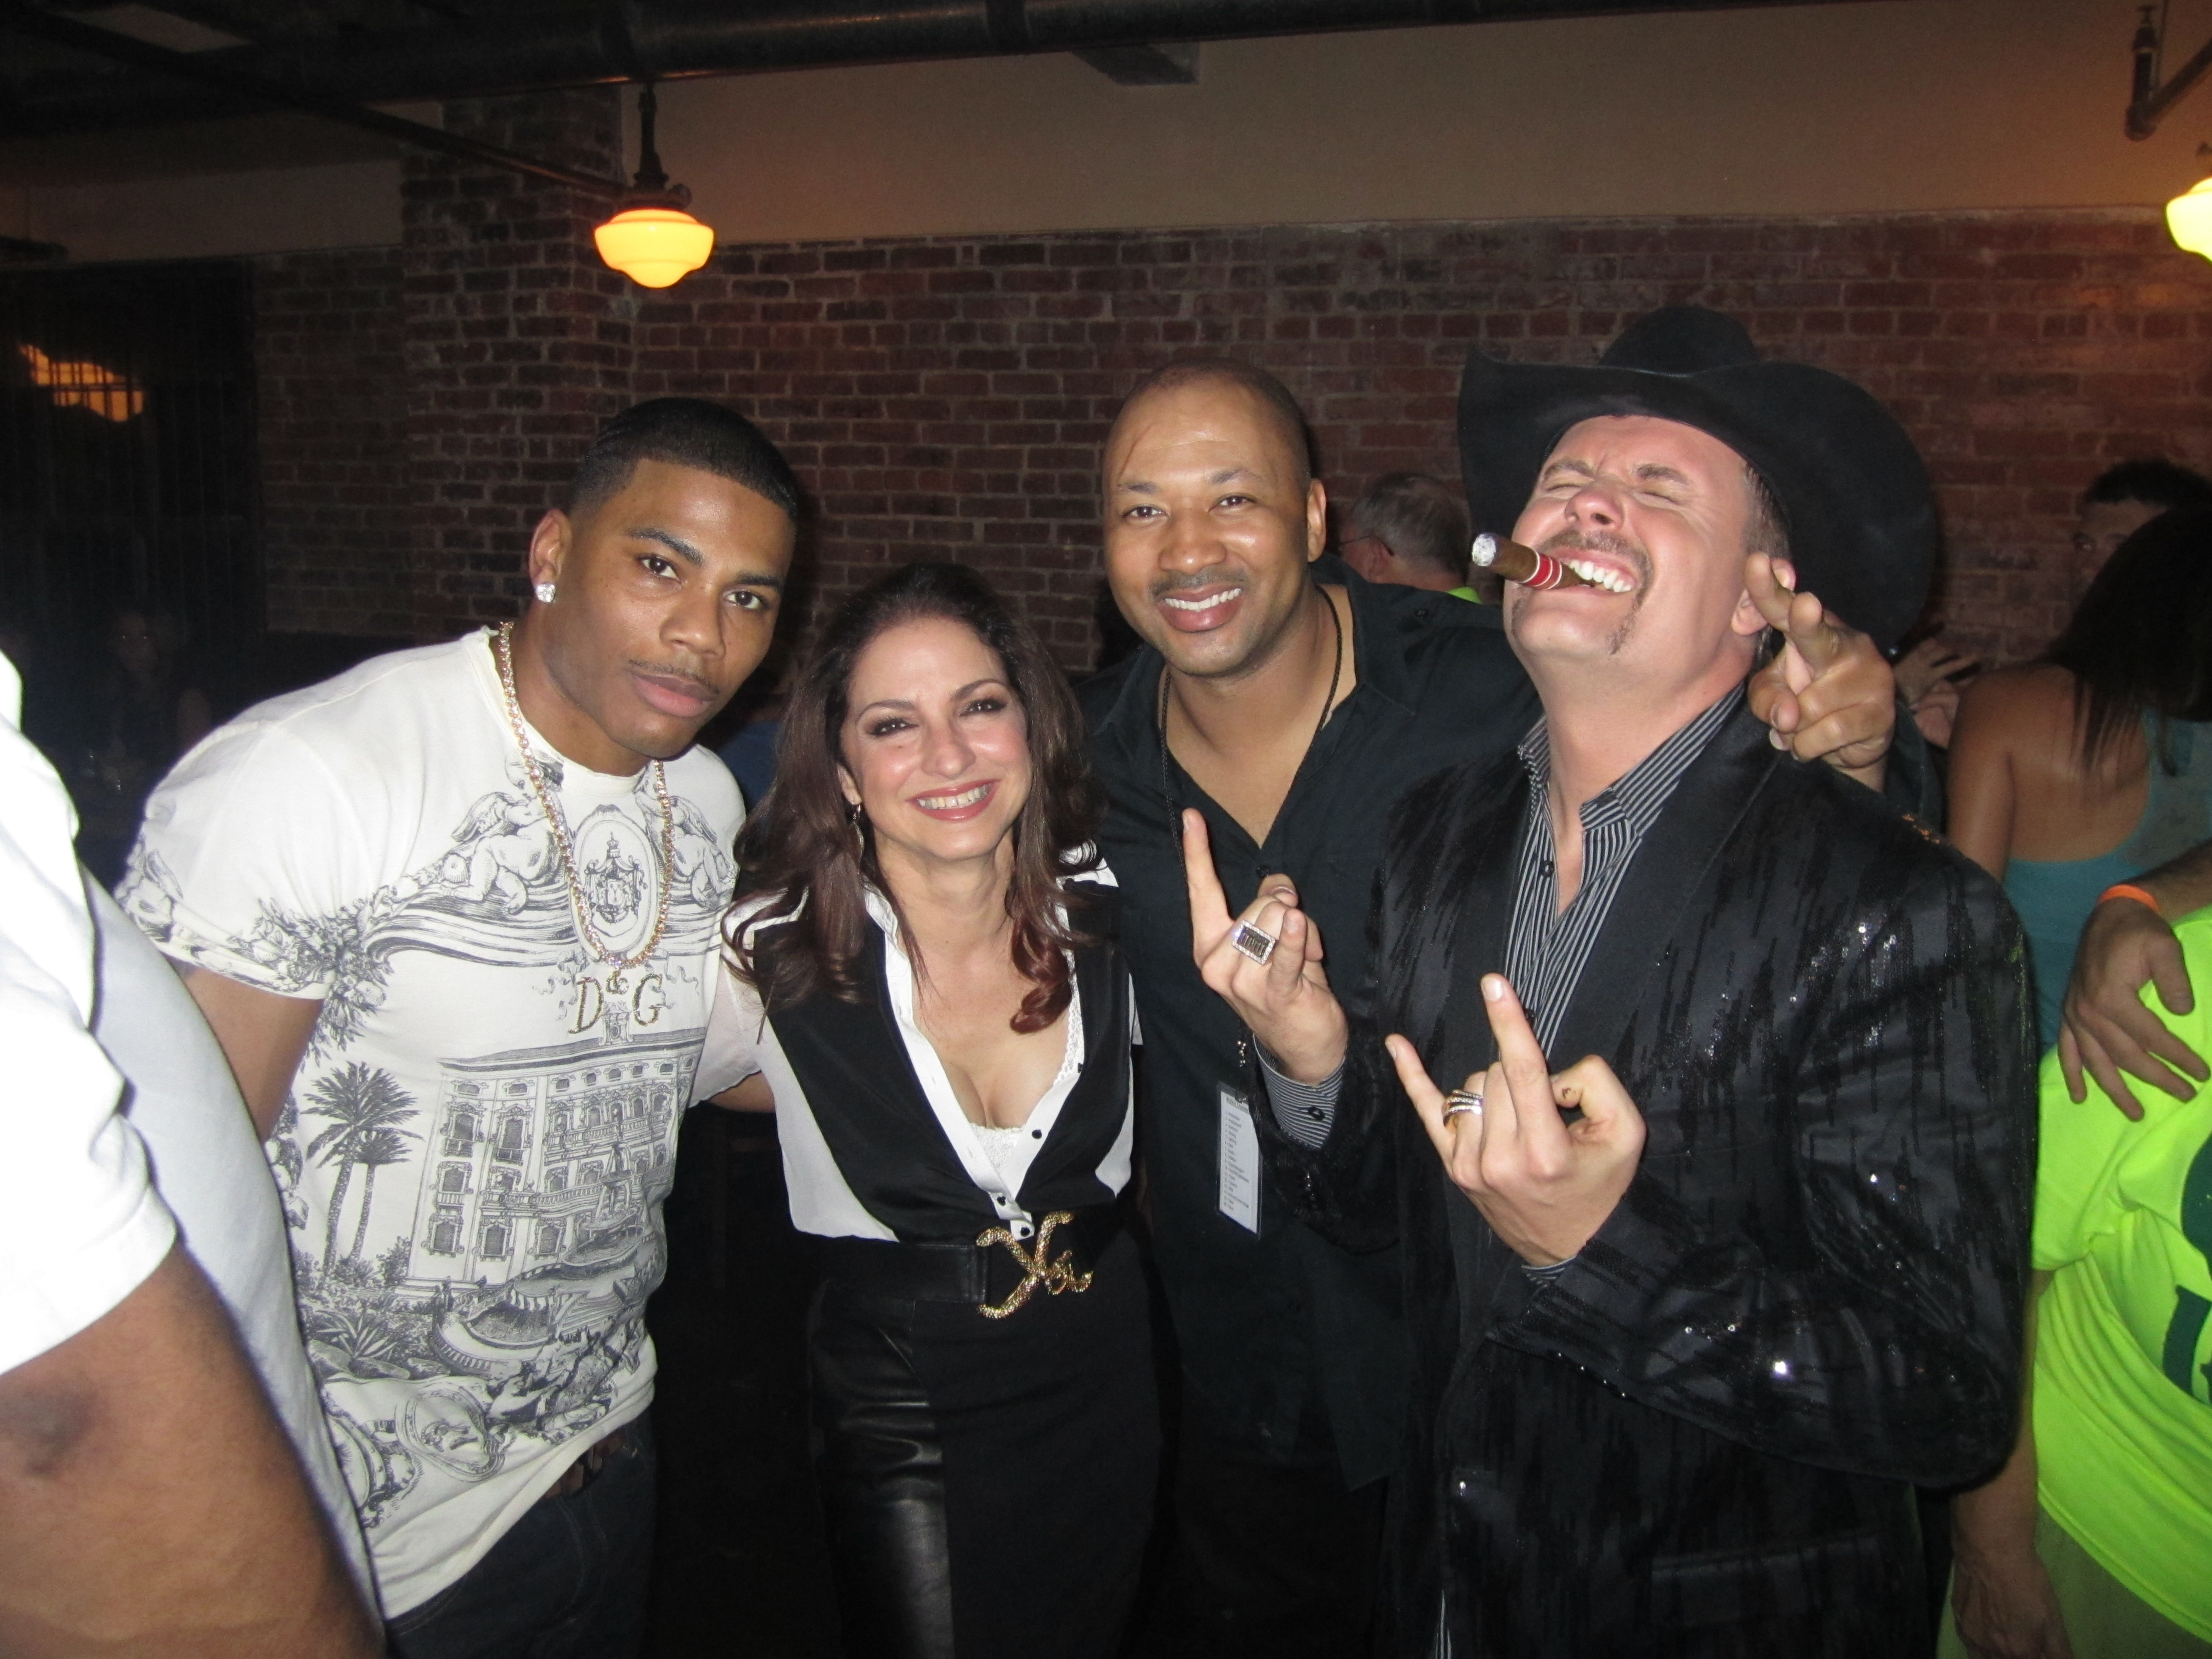 Alex Al after performing with Gloria Estefan, Nelly, and John Rich of country duo, 'Big & Rich'.